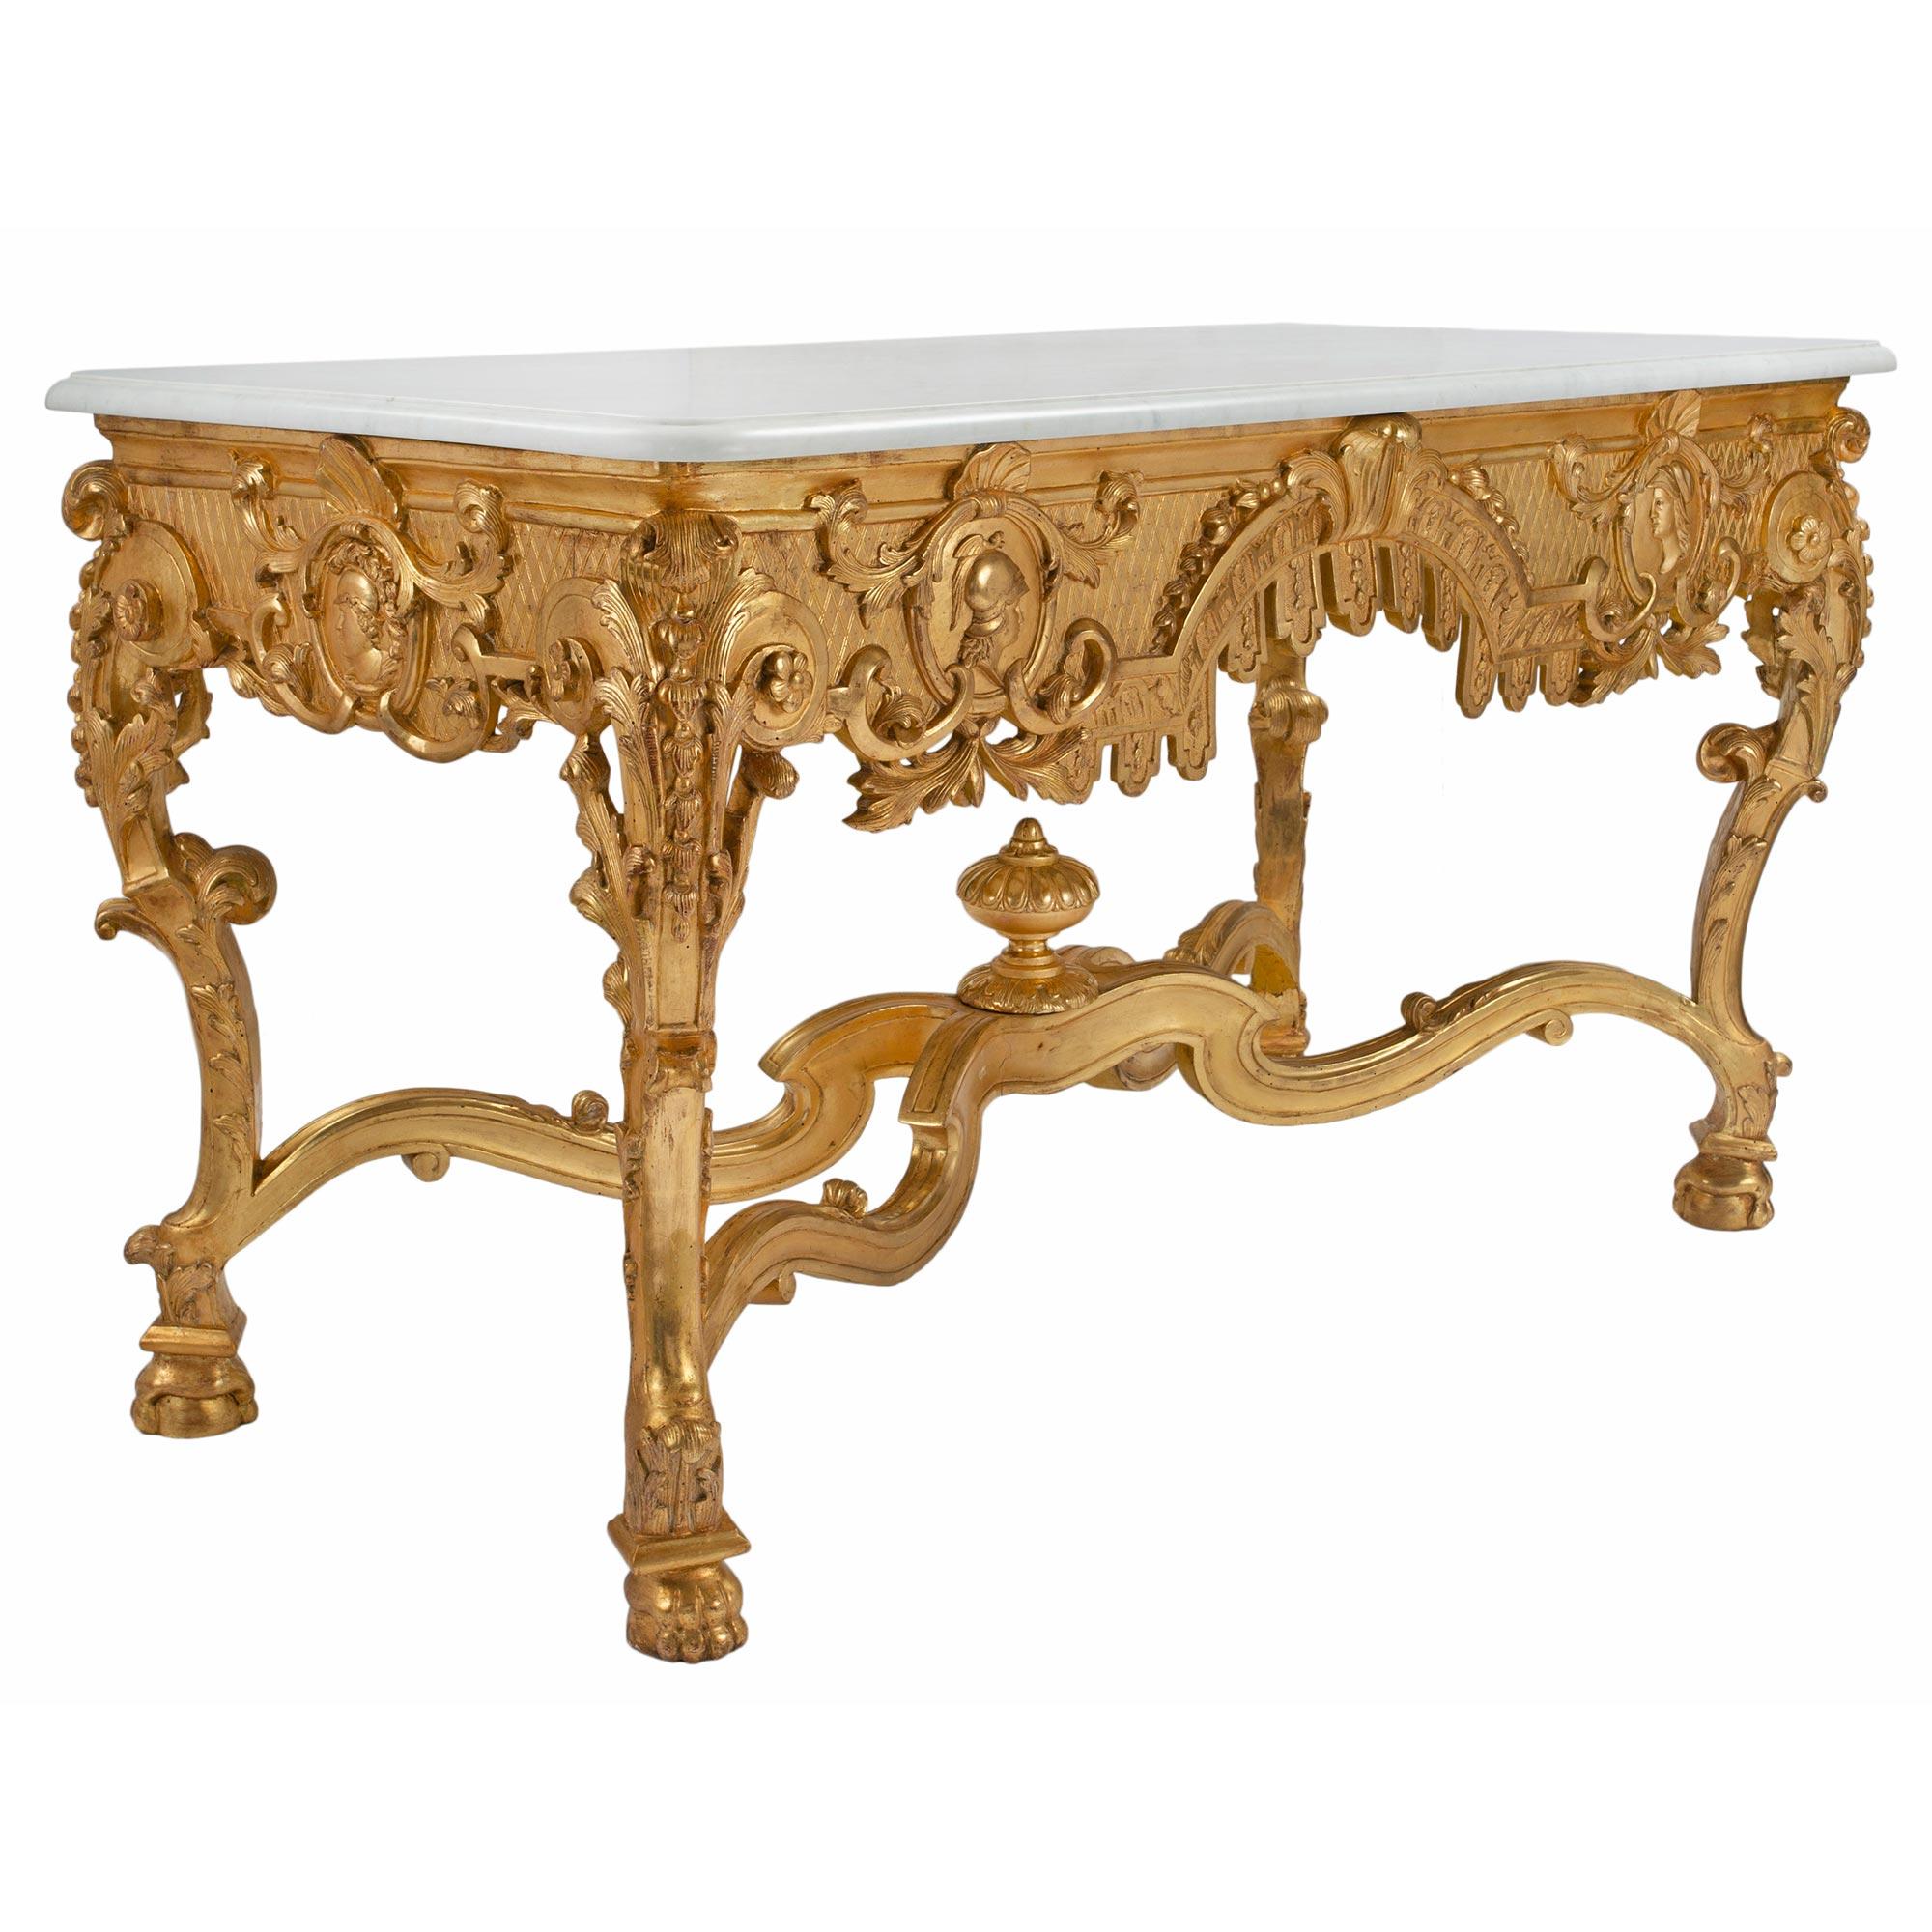 French 19th Century Regency Style Giltwood and Carrara Marble Centre Table In Good Condition For Sale In West Palm Beach, FL